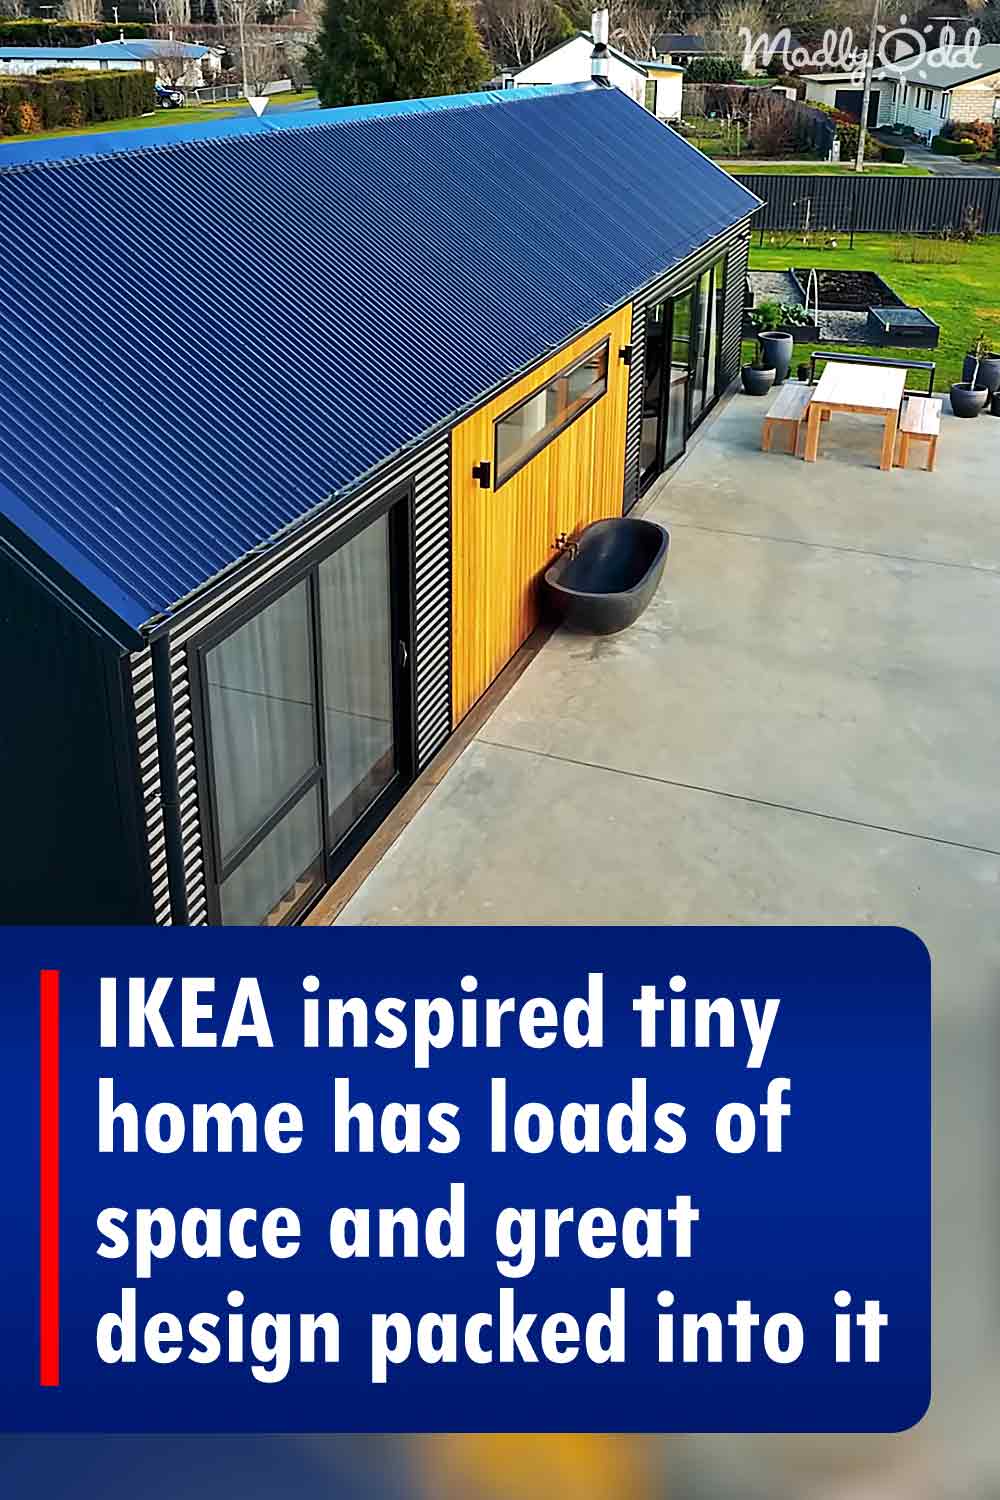 IKEA inspired tiny home has loads of space and great design packed into it